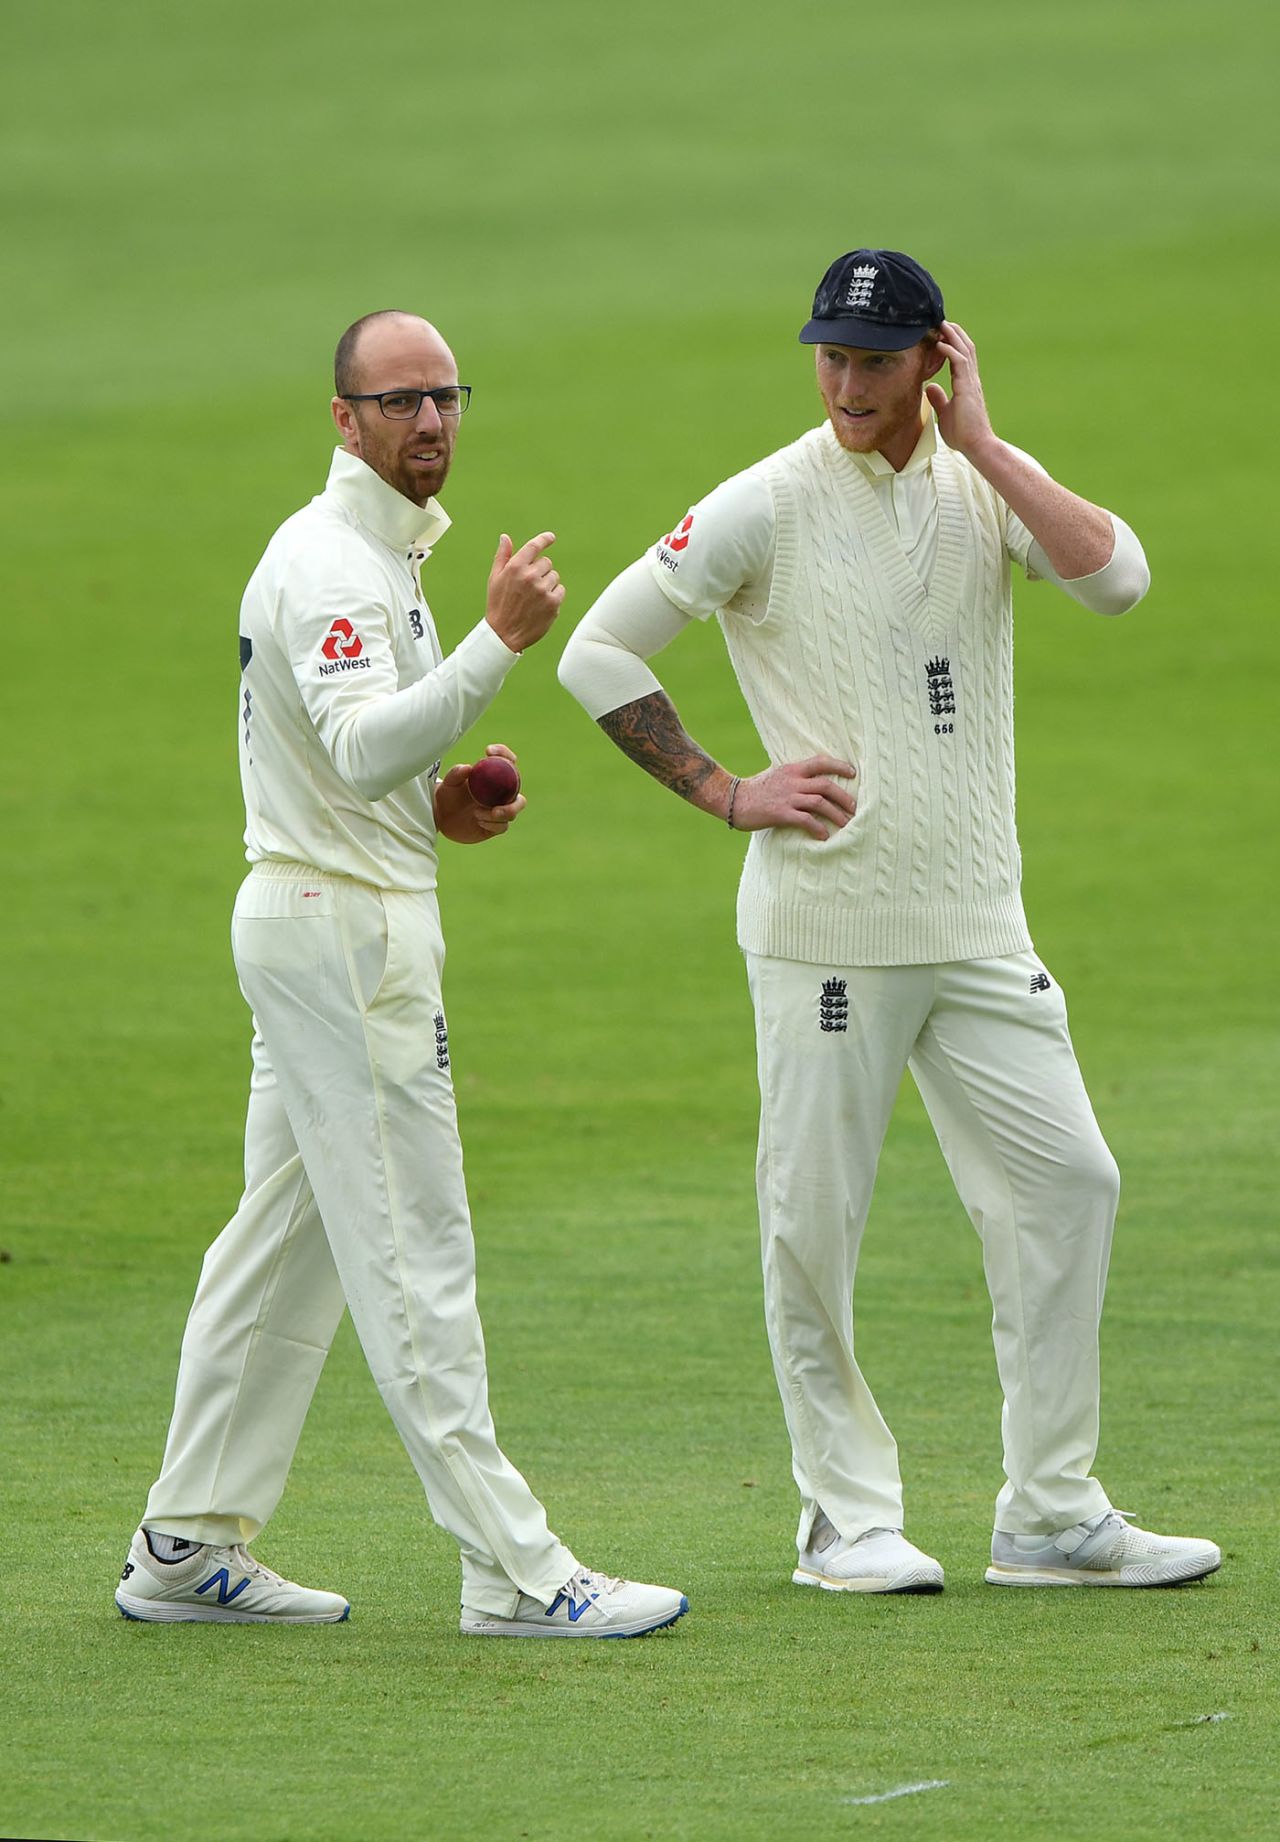 Jack Leach sets his field with Ben Stokes, Team Buttler v Team Stokes, Ageas Bowl, July 1, 2020